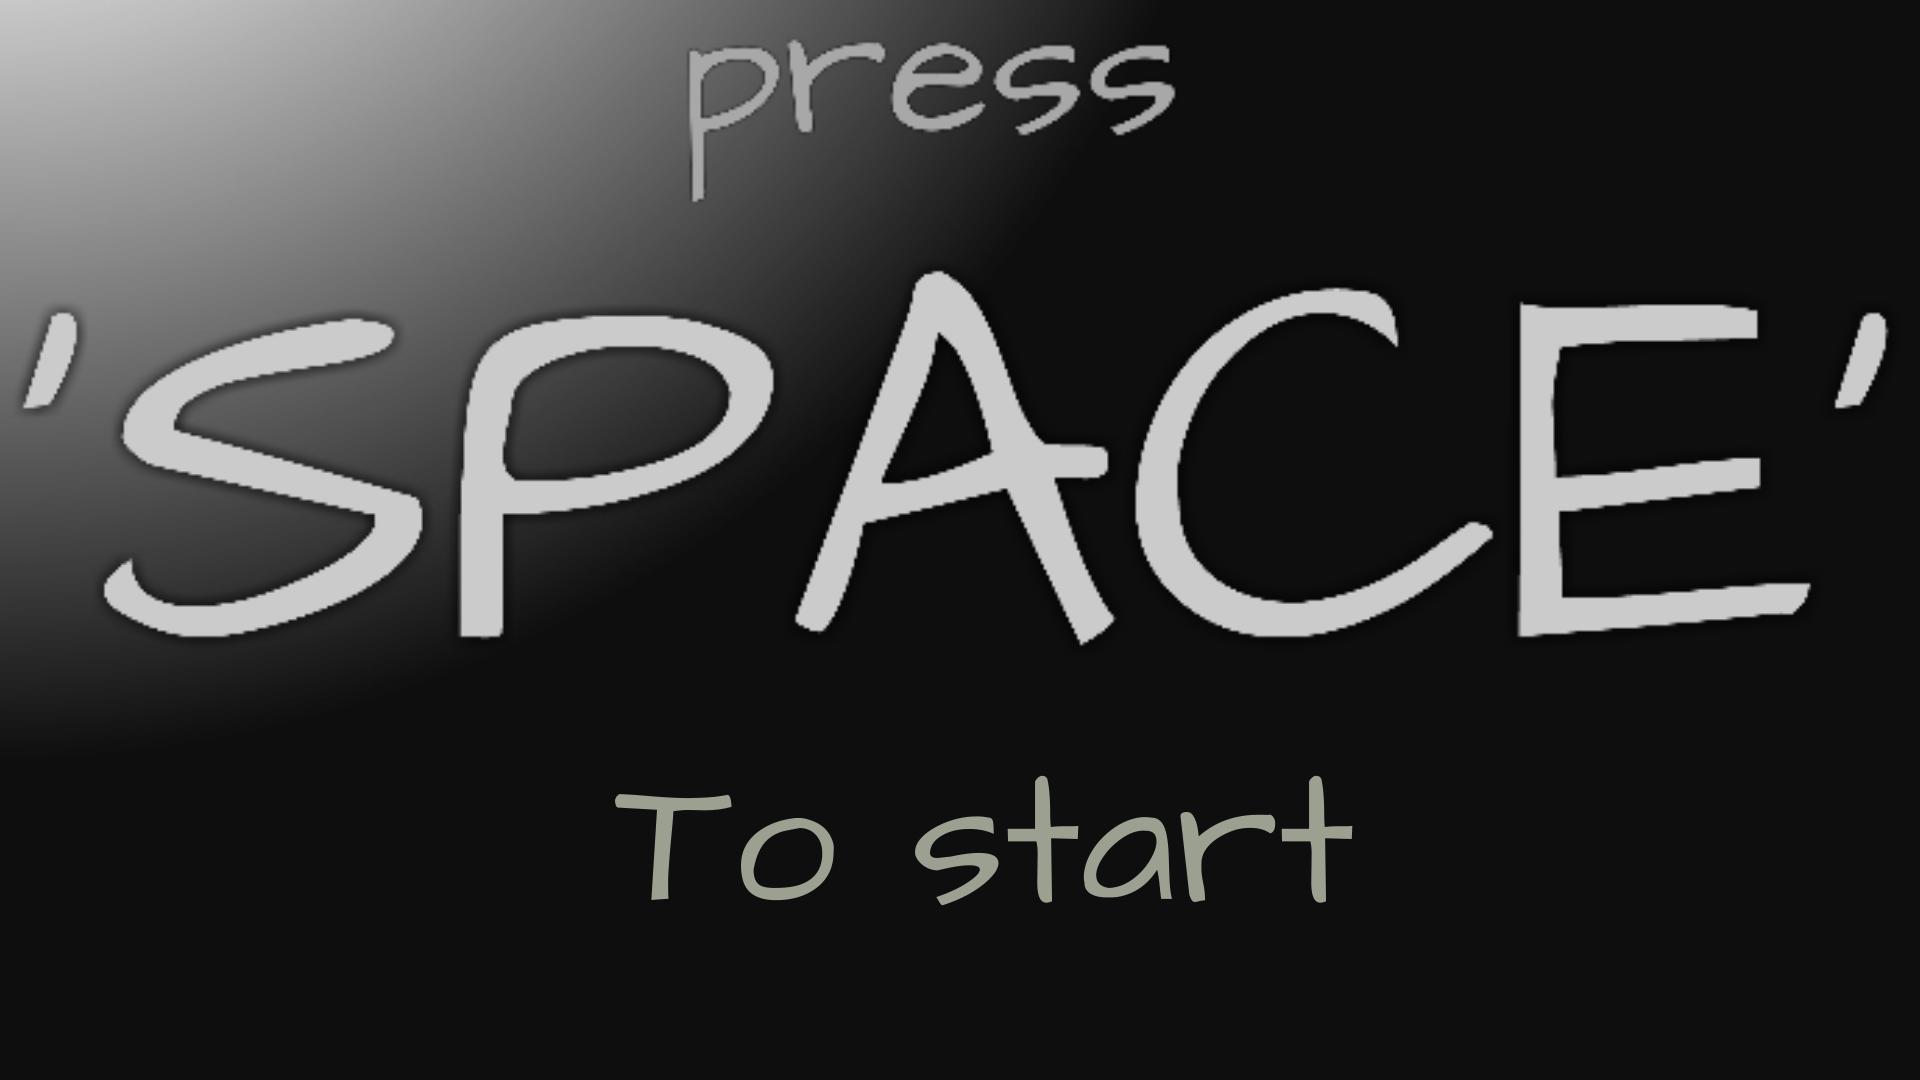 Just press. Press Space. Space надпись. Space starts. Space to start.